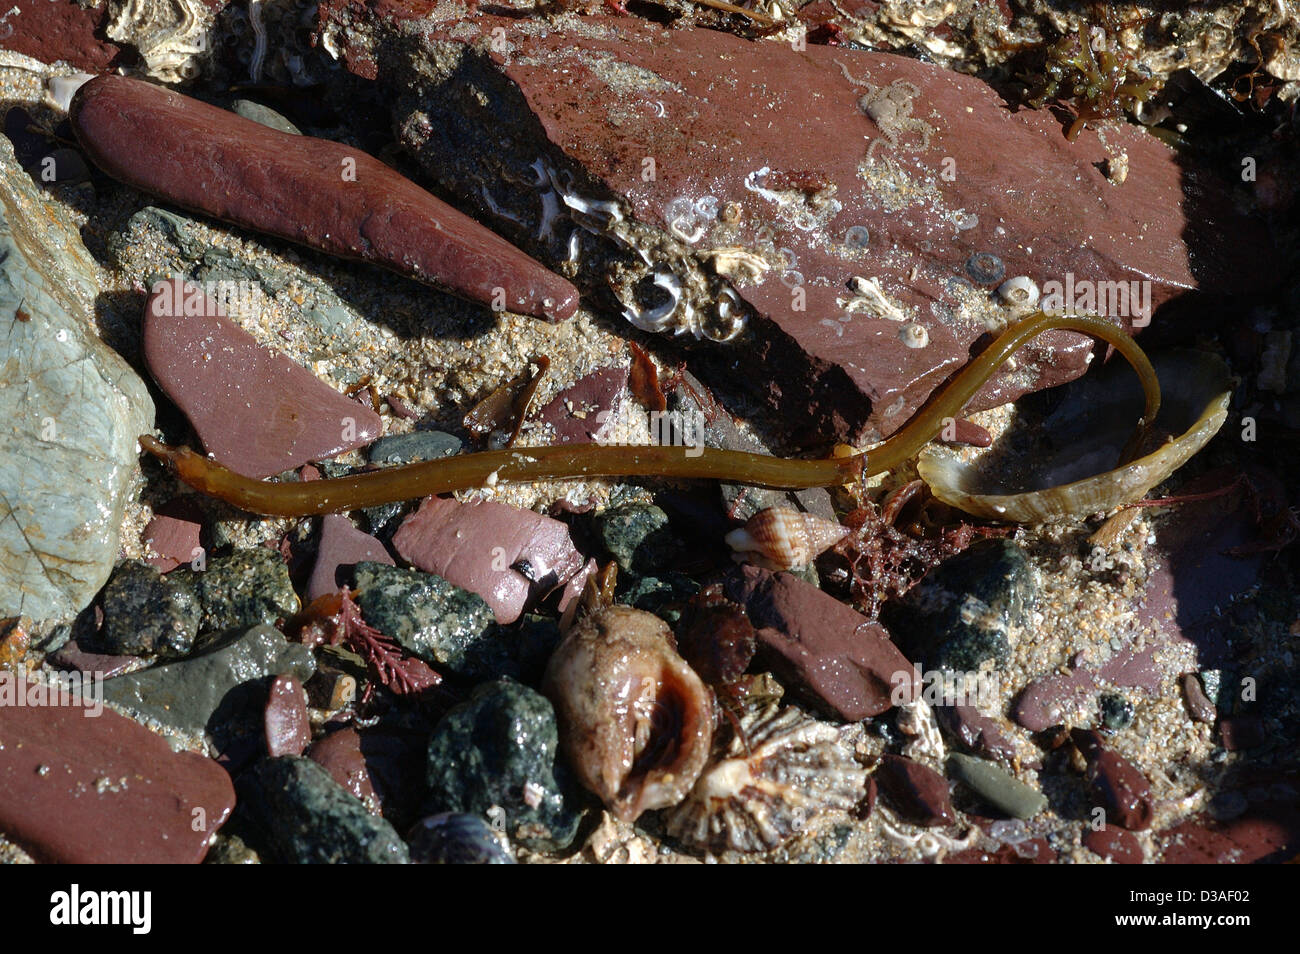 Worm pipefish (Nerophis lumbriciformis) which survives under damp rocks at lowtide UK Stock Photo